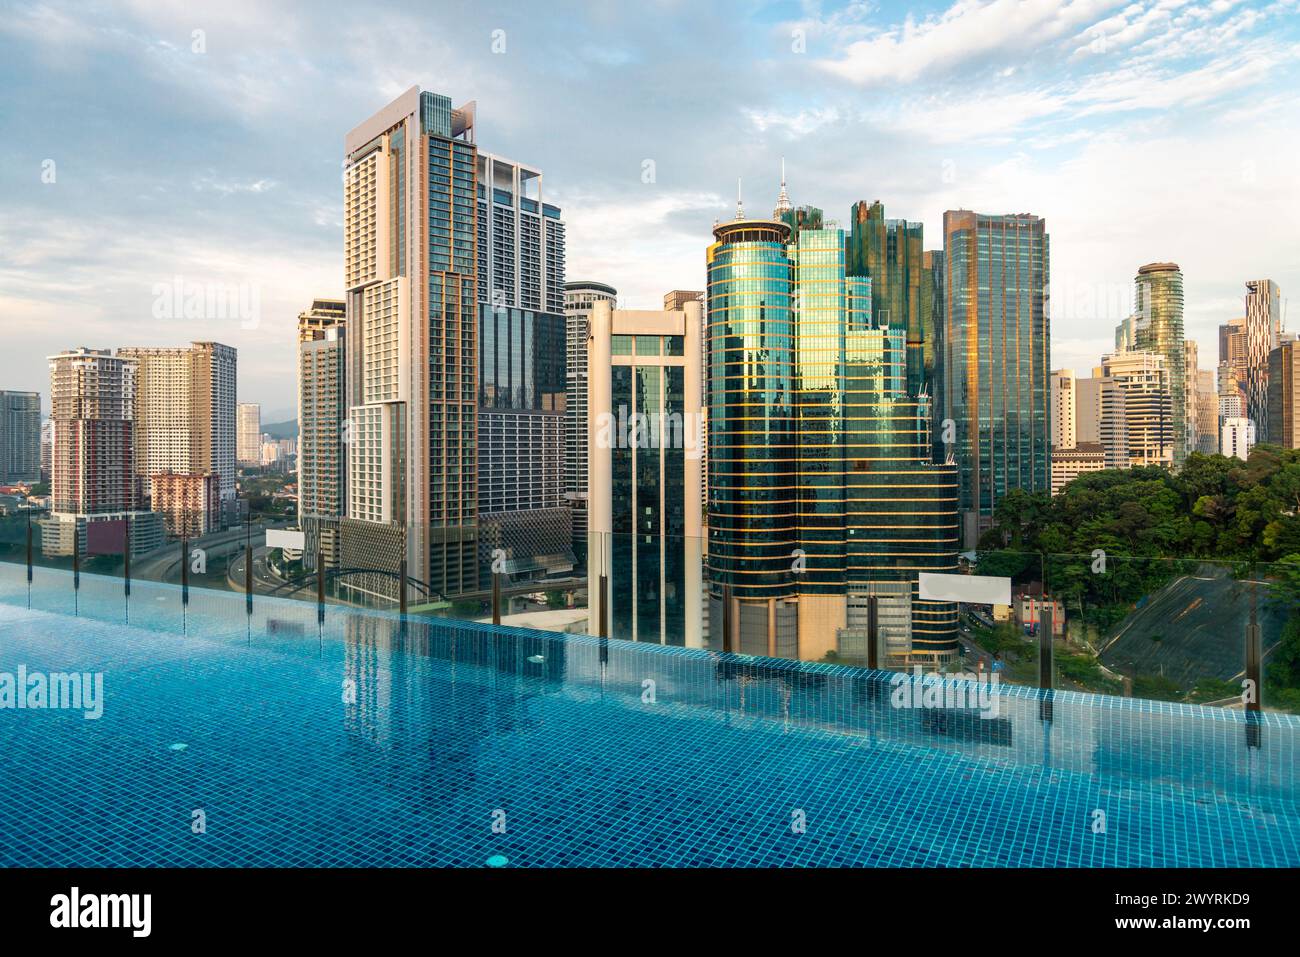 Stunning rootop view of KL city and Menara Kuala Lumpur,close to sunset with blue rooftop bar infinity pool in the foreground and blue sky dotted with Stock Photo